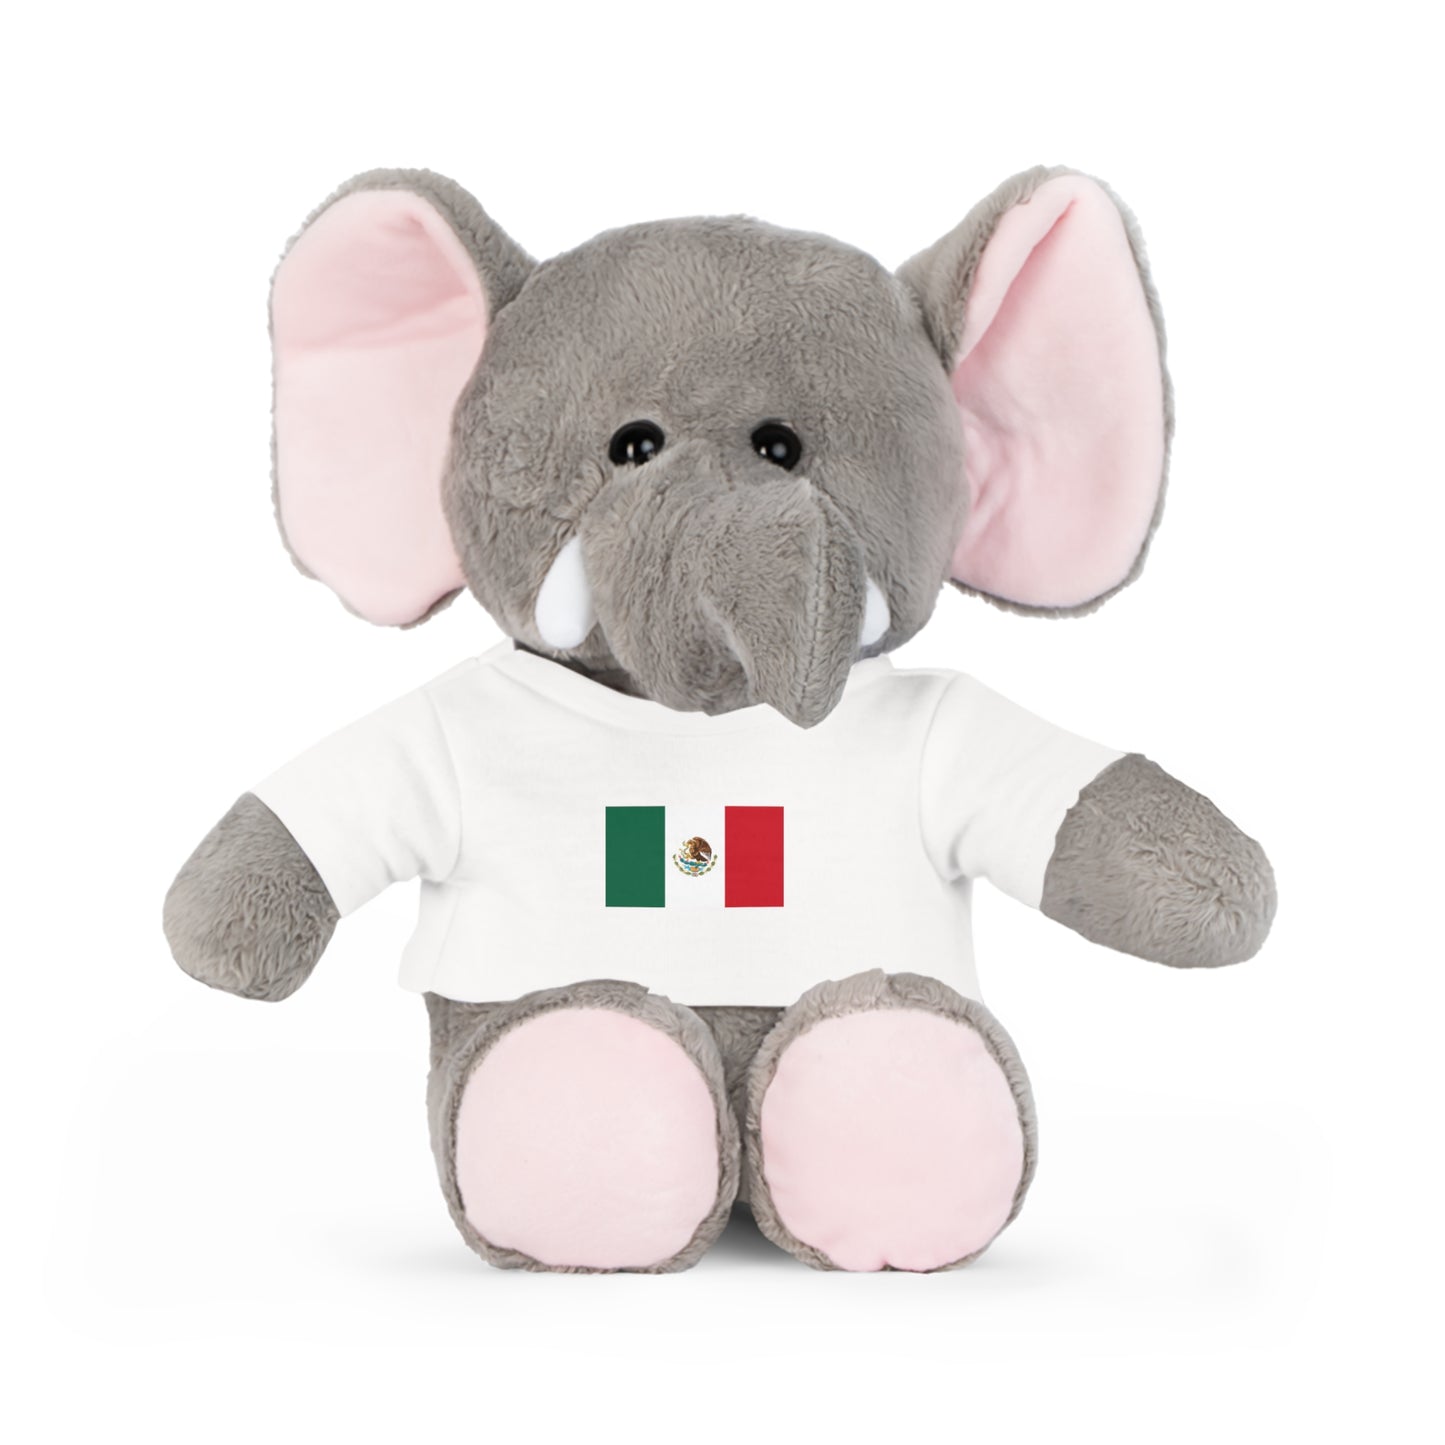 Plush Toy with Mexican Flag Shirt